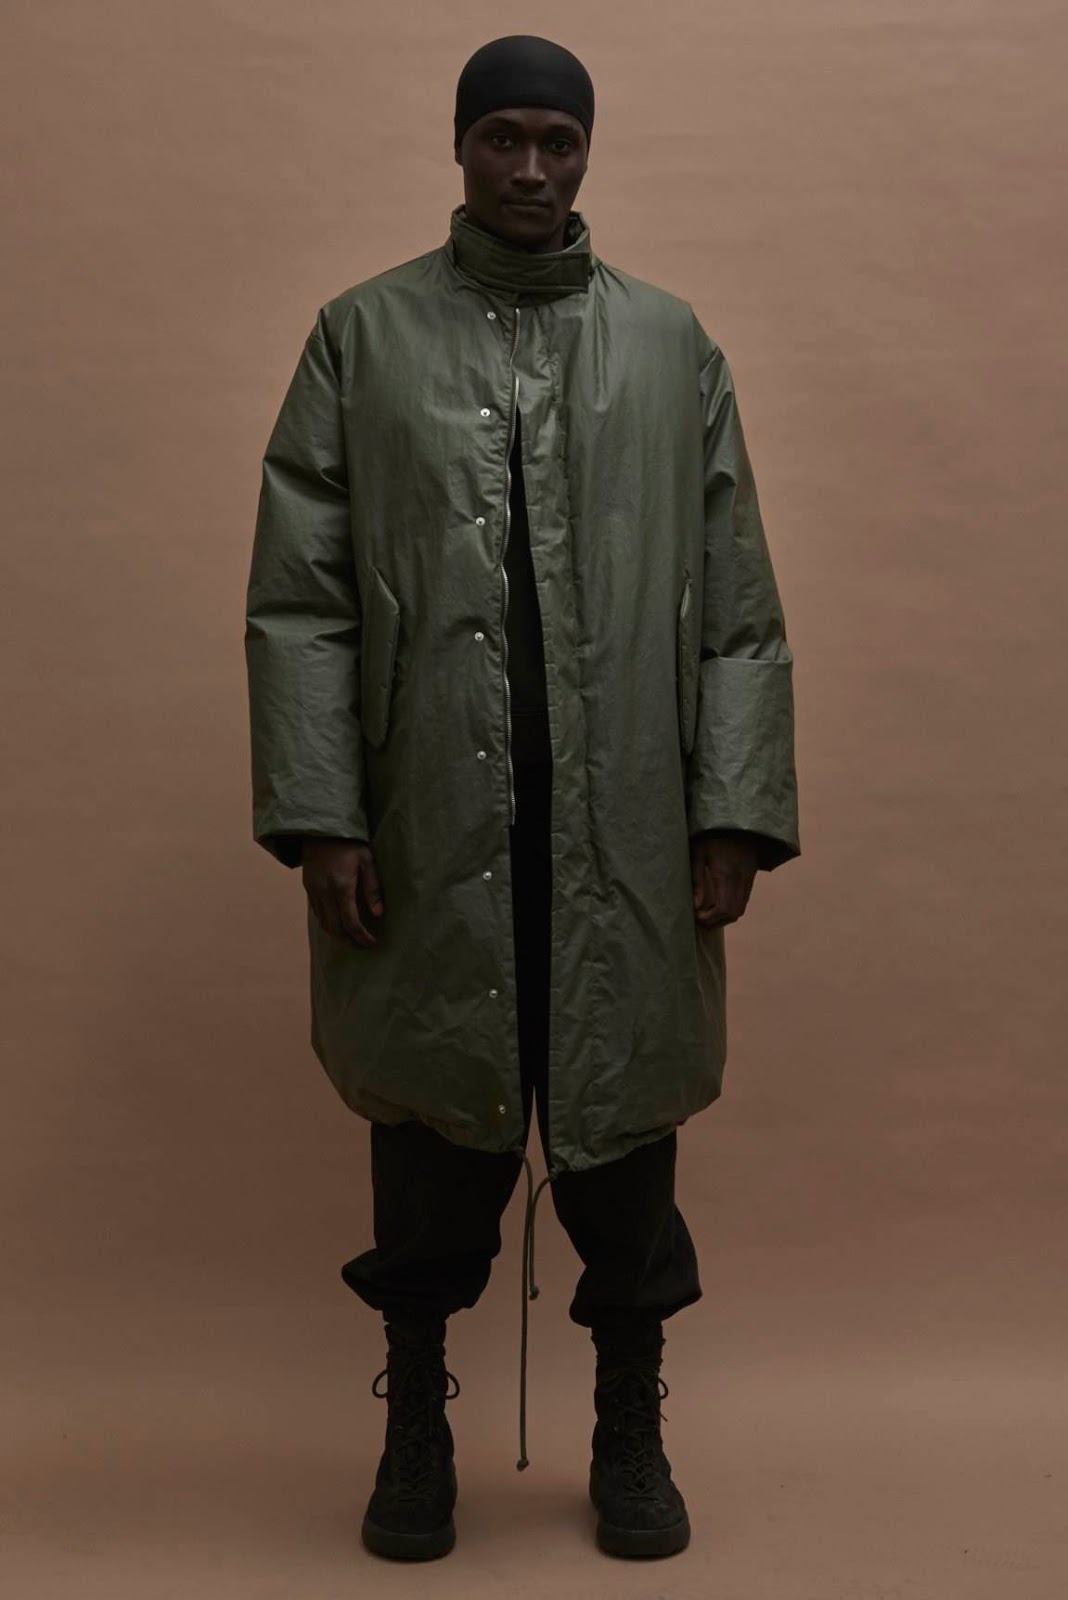 Yeezy Season 3 Fall/Winter 2016/17 Collection | Male Fashion Trends